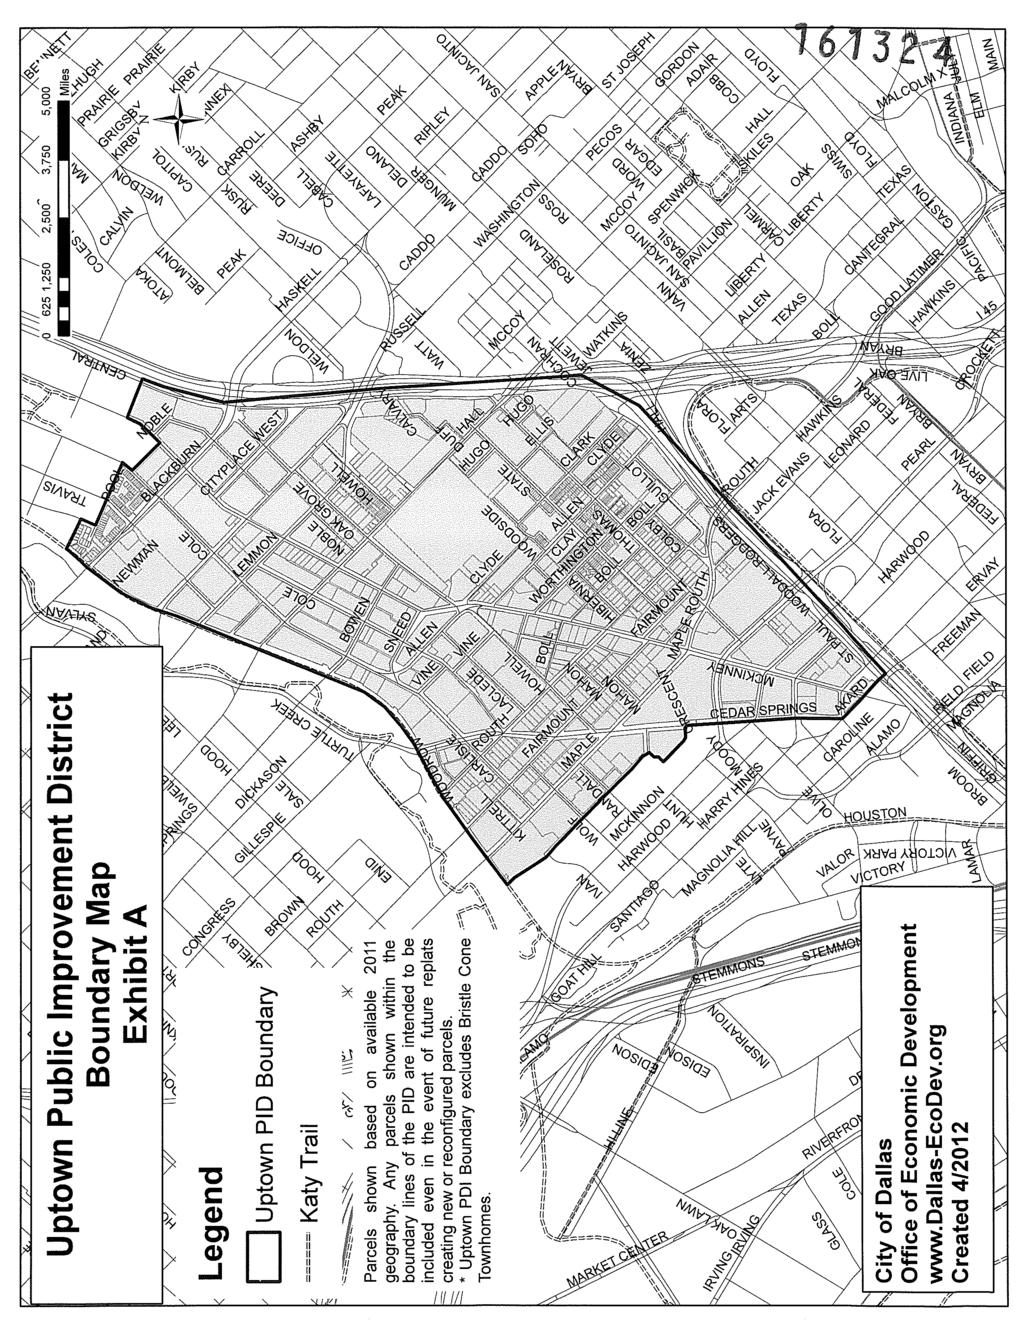 Uptown Public Improvement District Boundary Map Exhibit A Legend I I Uptown PID Boundary Katy Trail _ / -j/ \\\\, Parcels shown based on available 2011 geography.